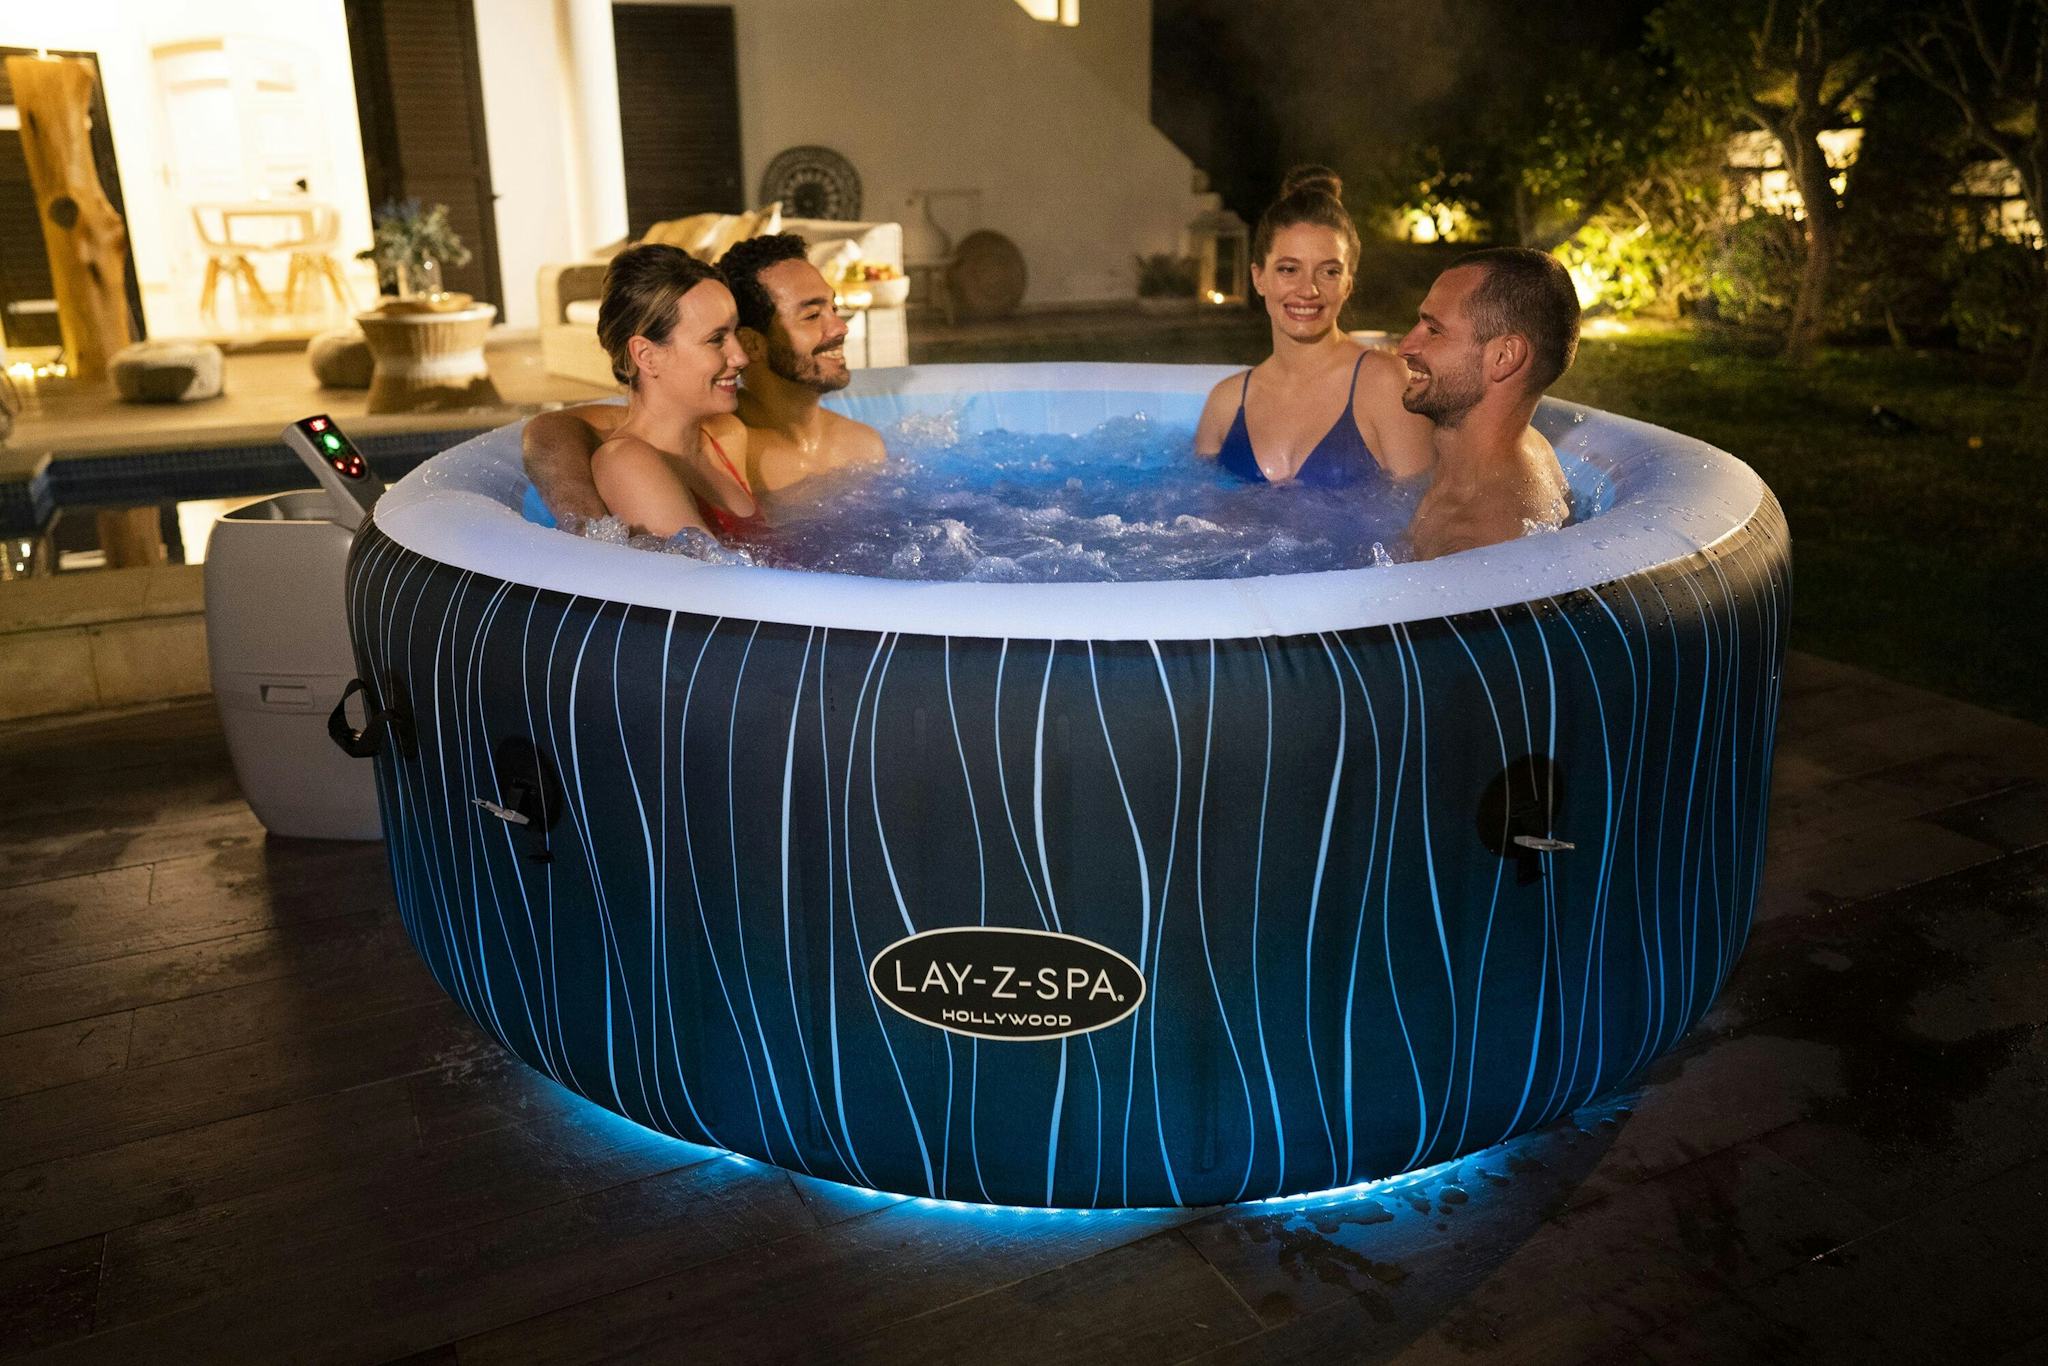 Spas Gonflables Spa gonflable rond Lay-Z-Spa Hollywood Airjet™ 4 - 6 personnes Bestway 47